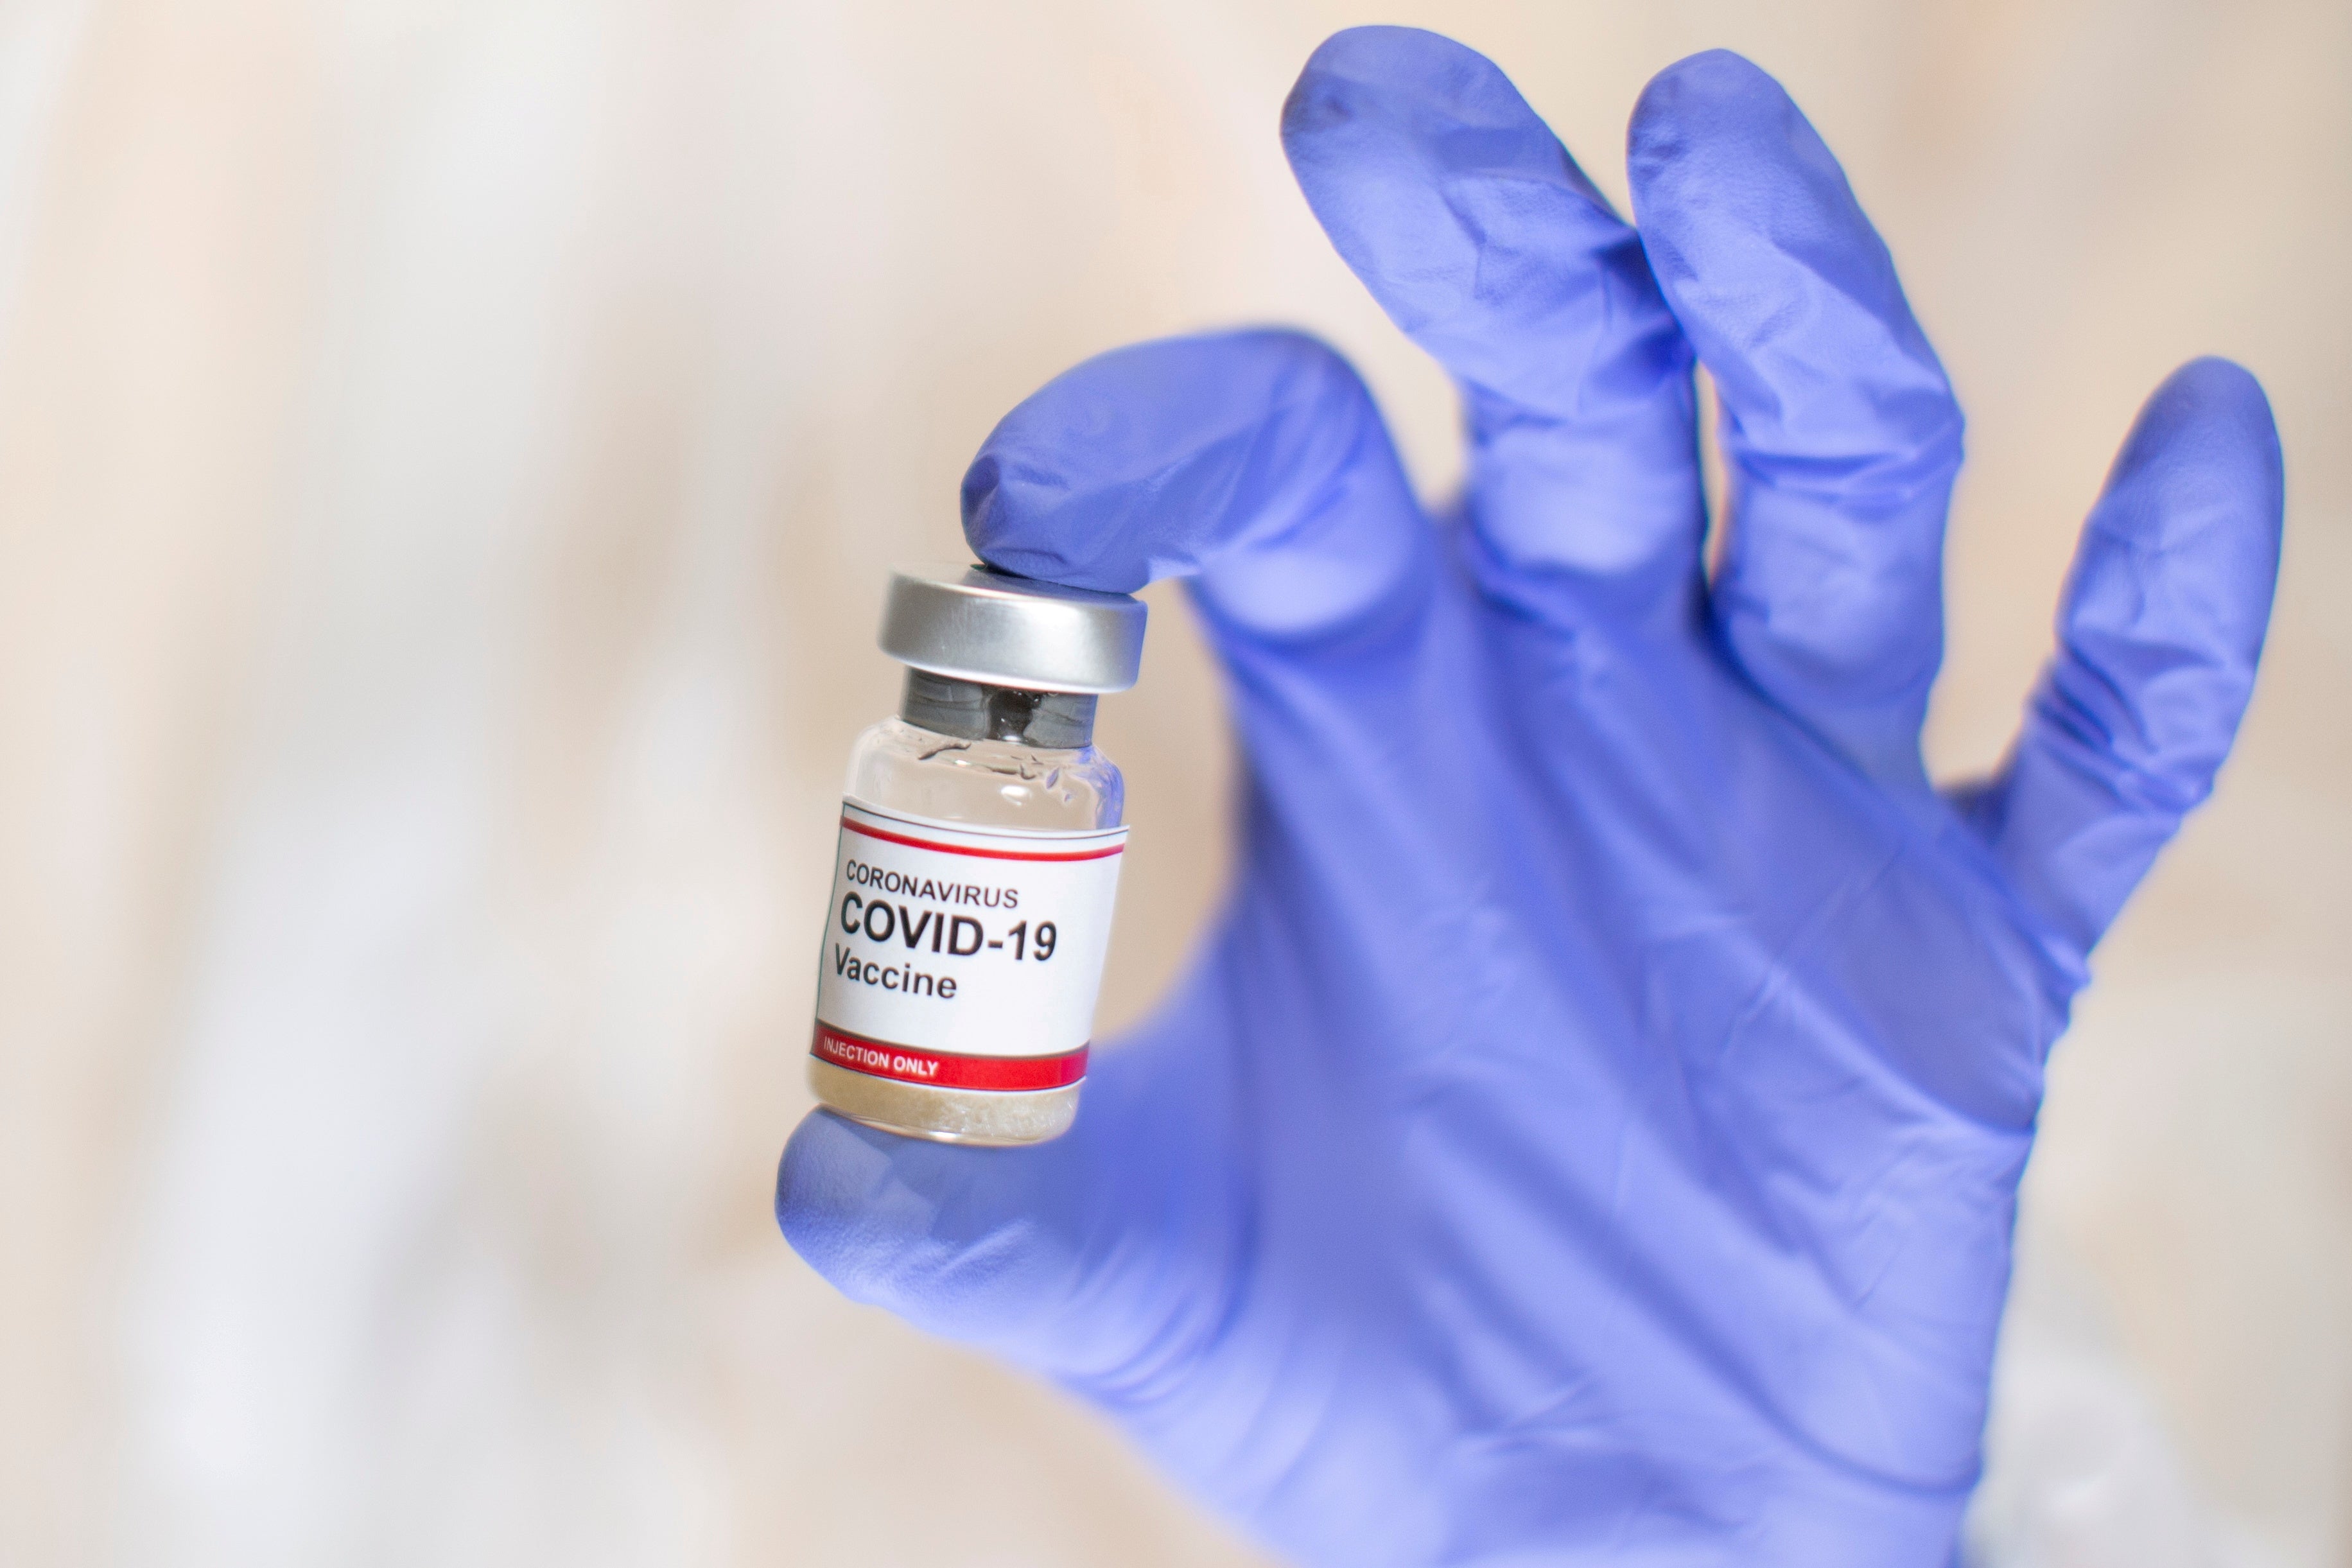 A woman holds a small bottle labeled with a "Coronavirus COVID-19 Vaccine" sticker